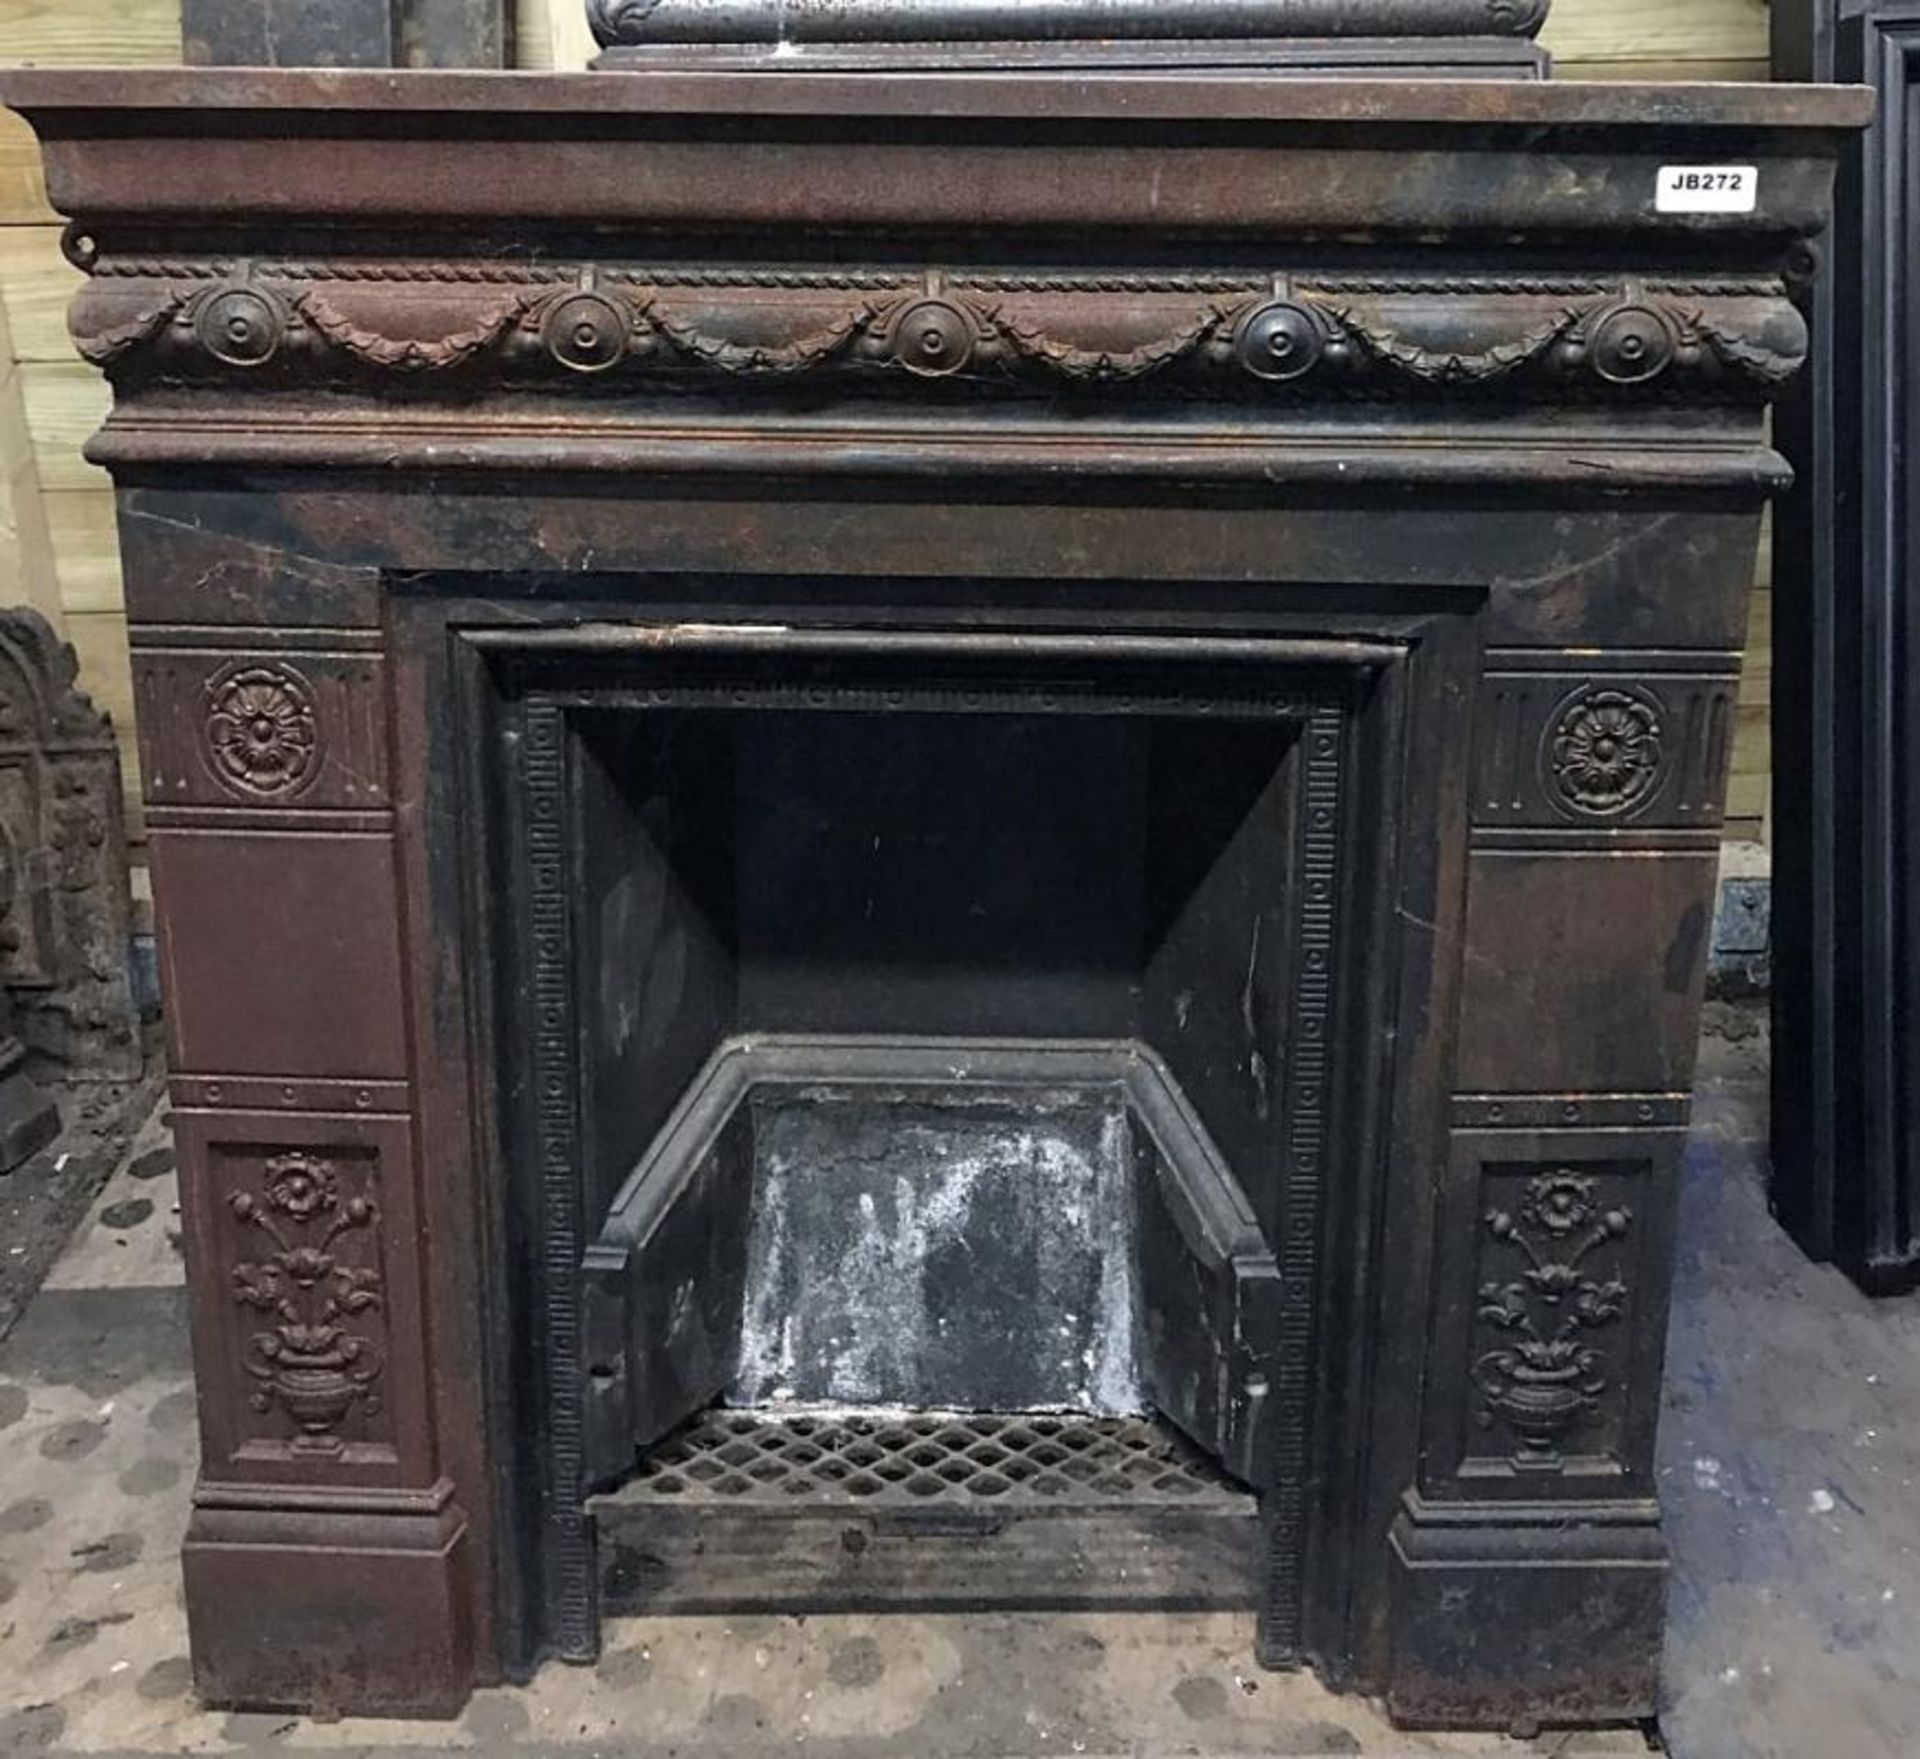 1 x Stunning Antique Victorian Cast Iron Fire Surround With Ornate Sides - Dimensions: Height 104cm